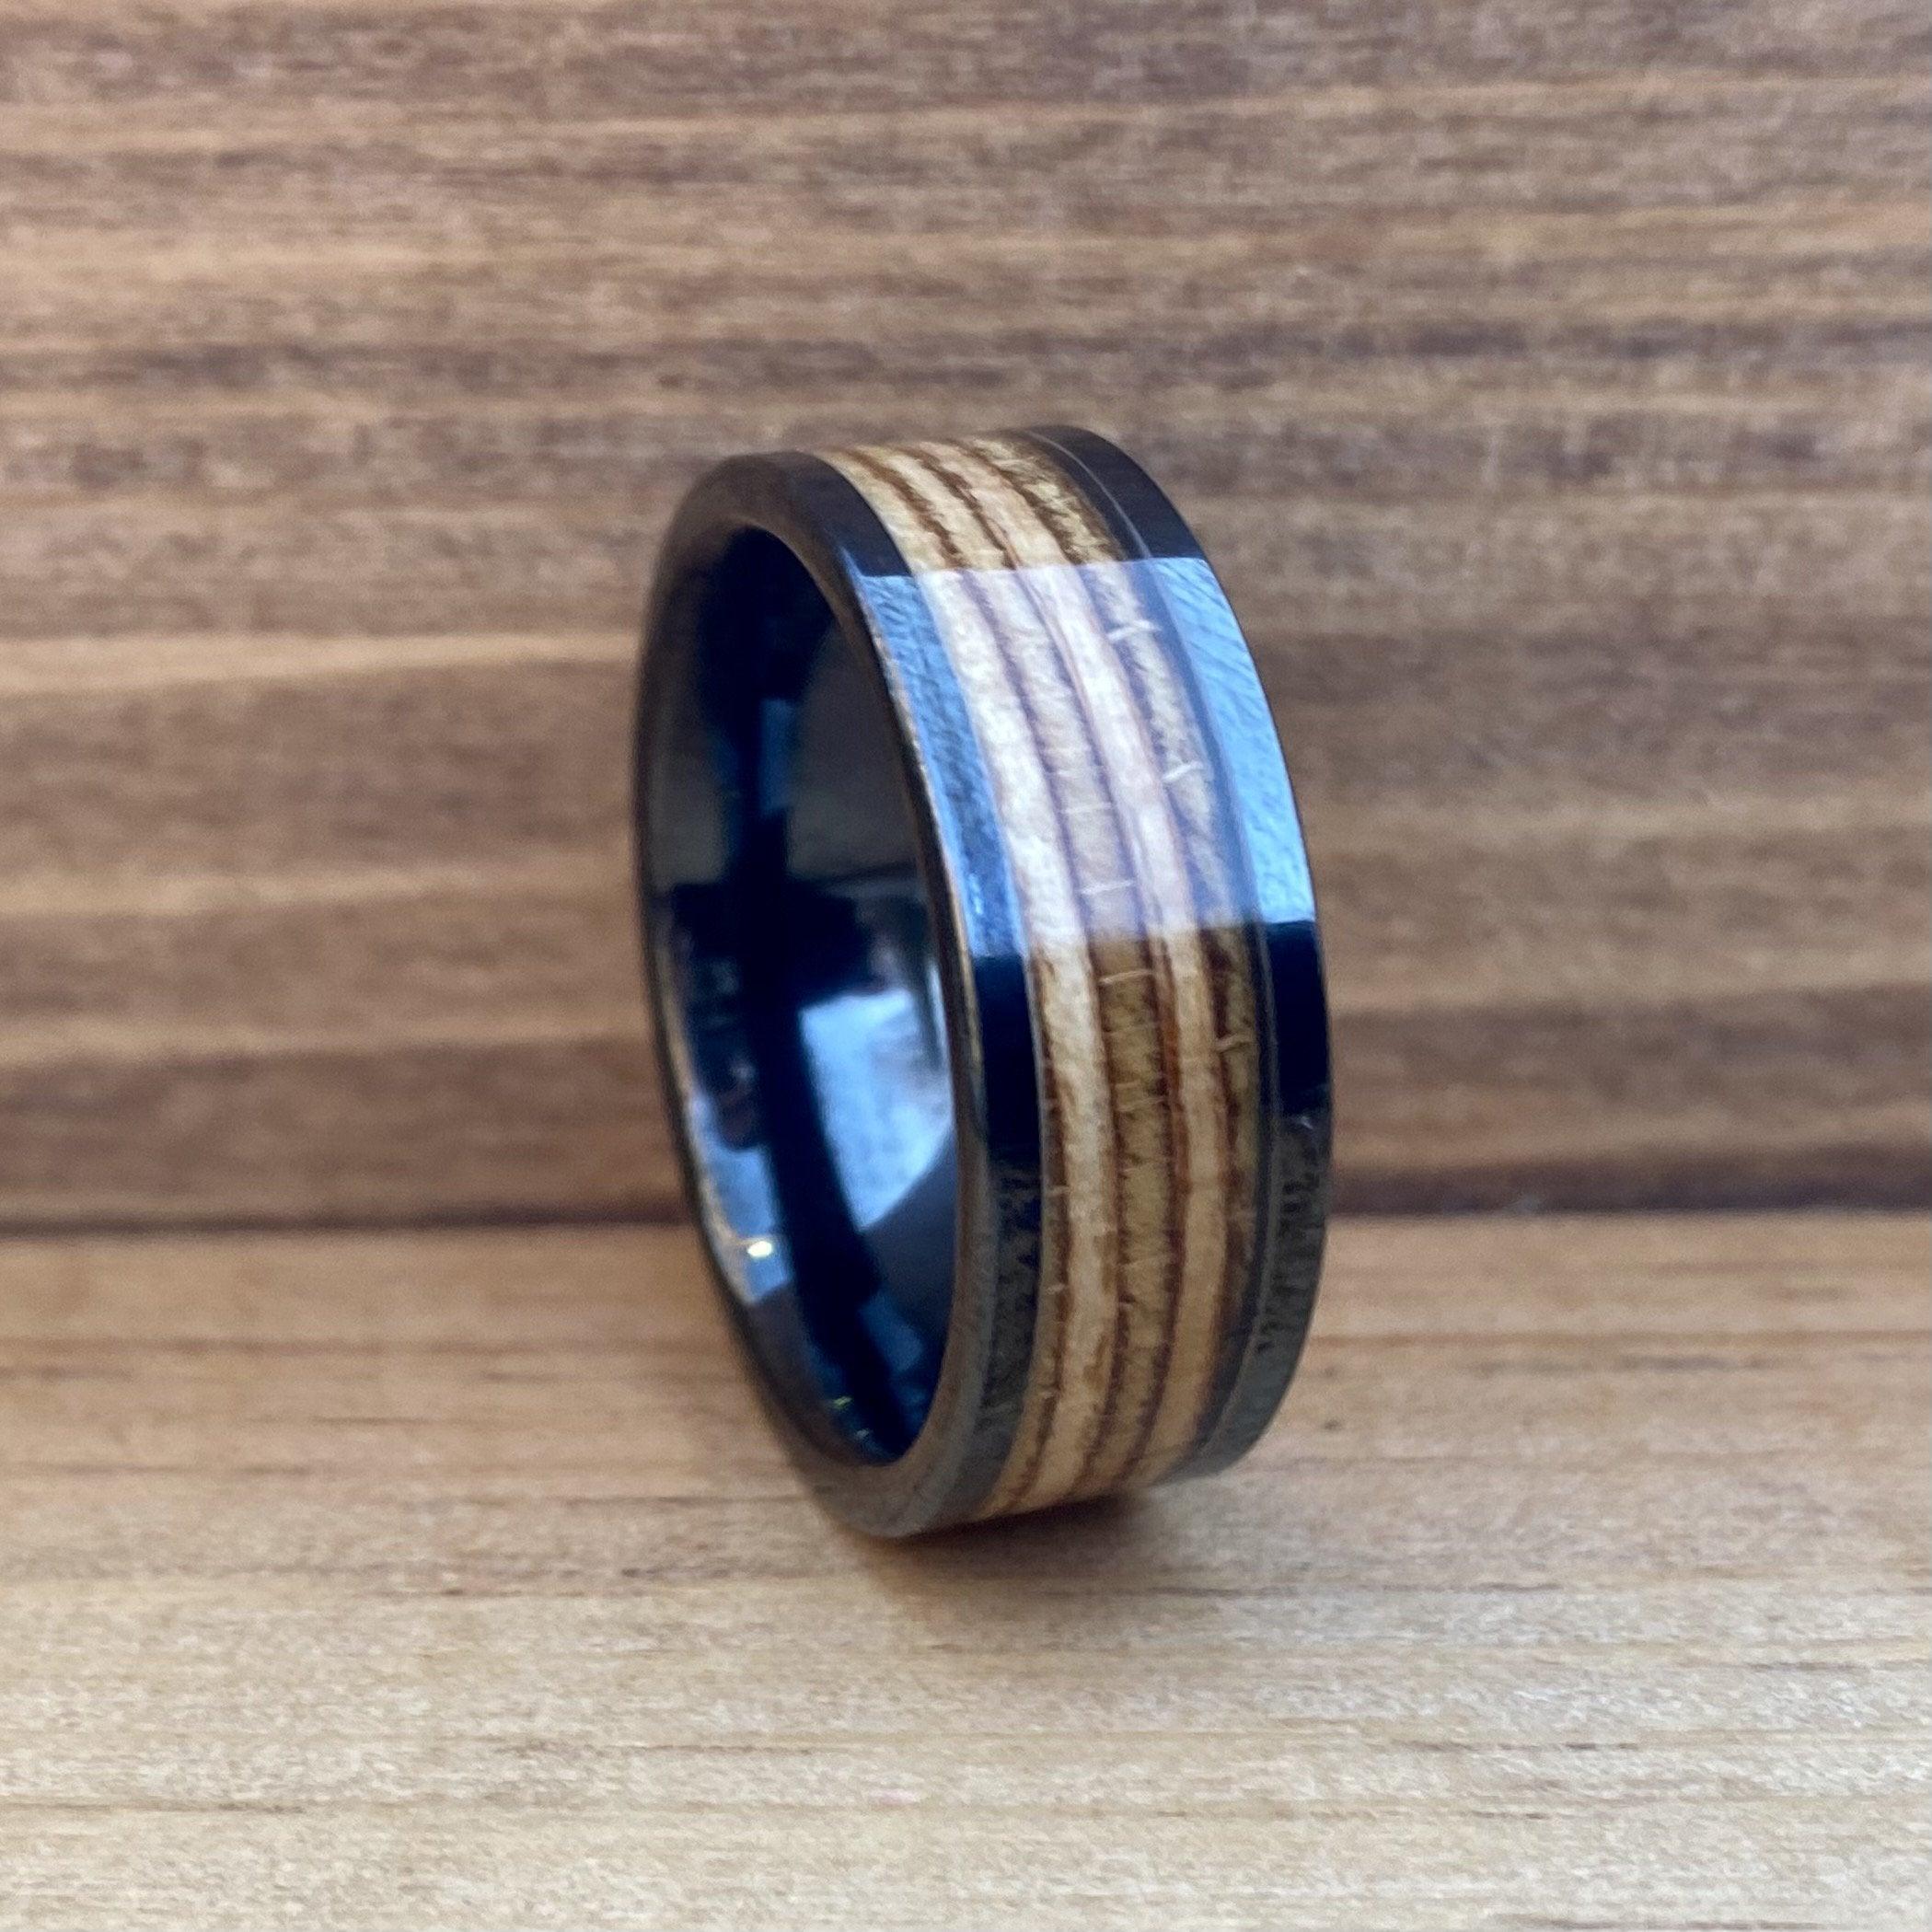 BW James Jewelers ALT Wedding Band "The Warsaw" 100% USA Made Black Ceramic Ring With Wood From AK-47 Rifle